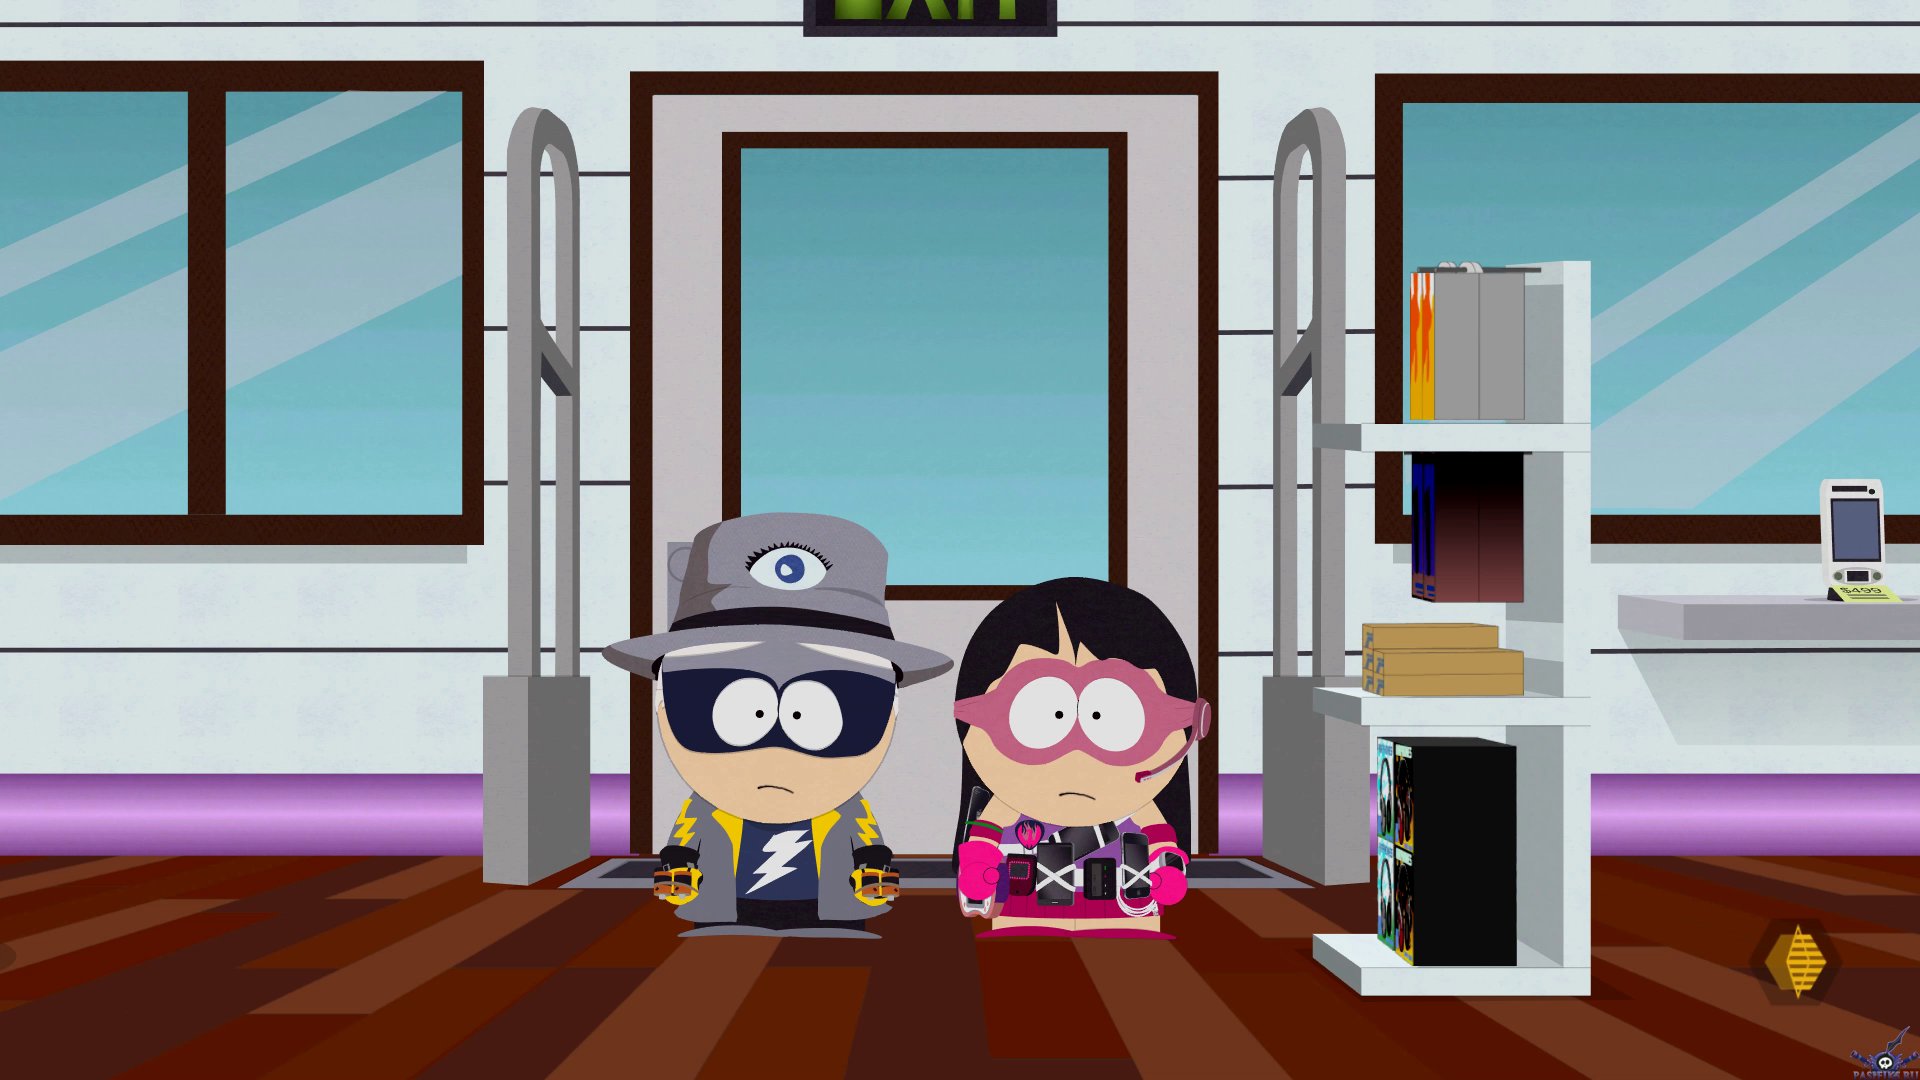 pc-28-south-park-the-fractured-but-whole---pozvat-menya